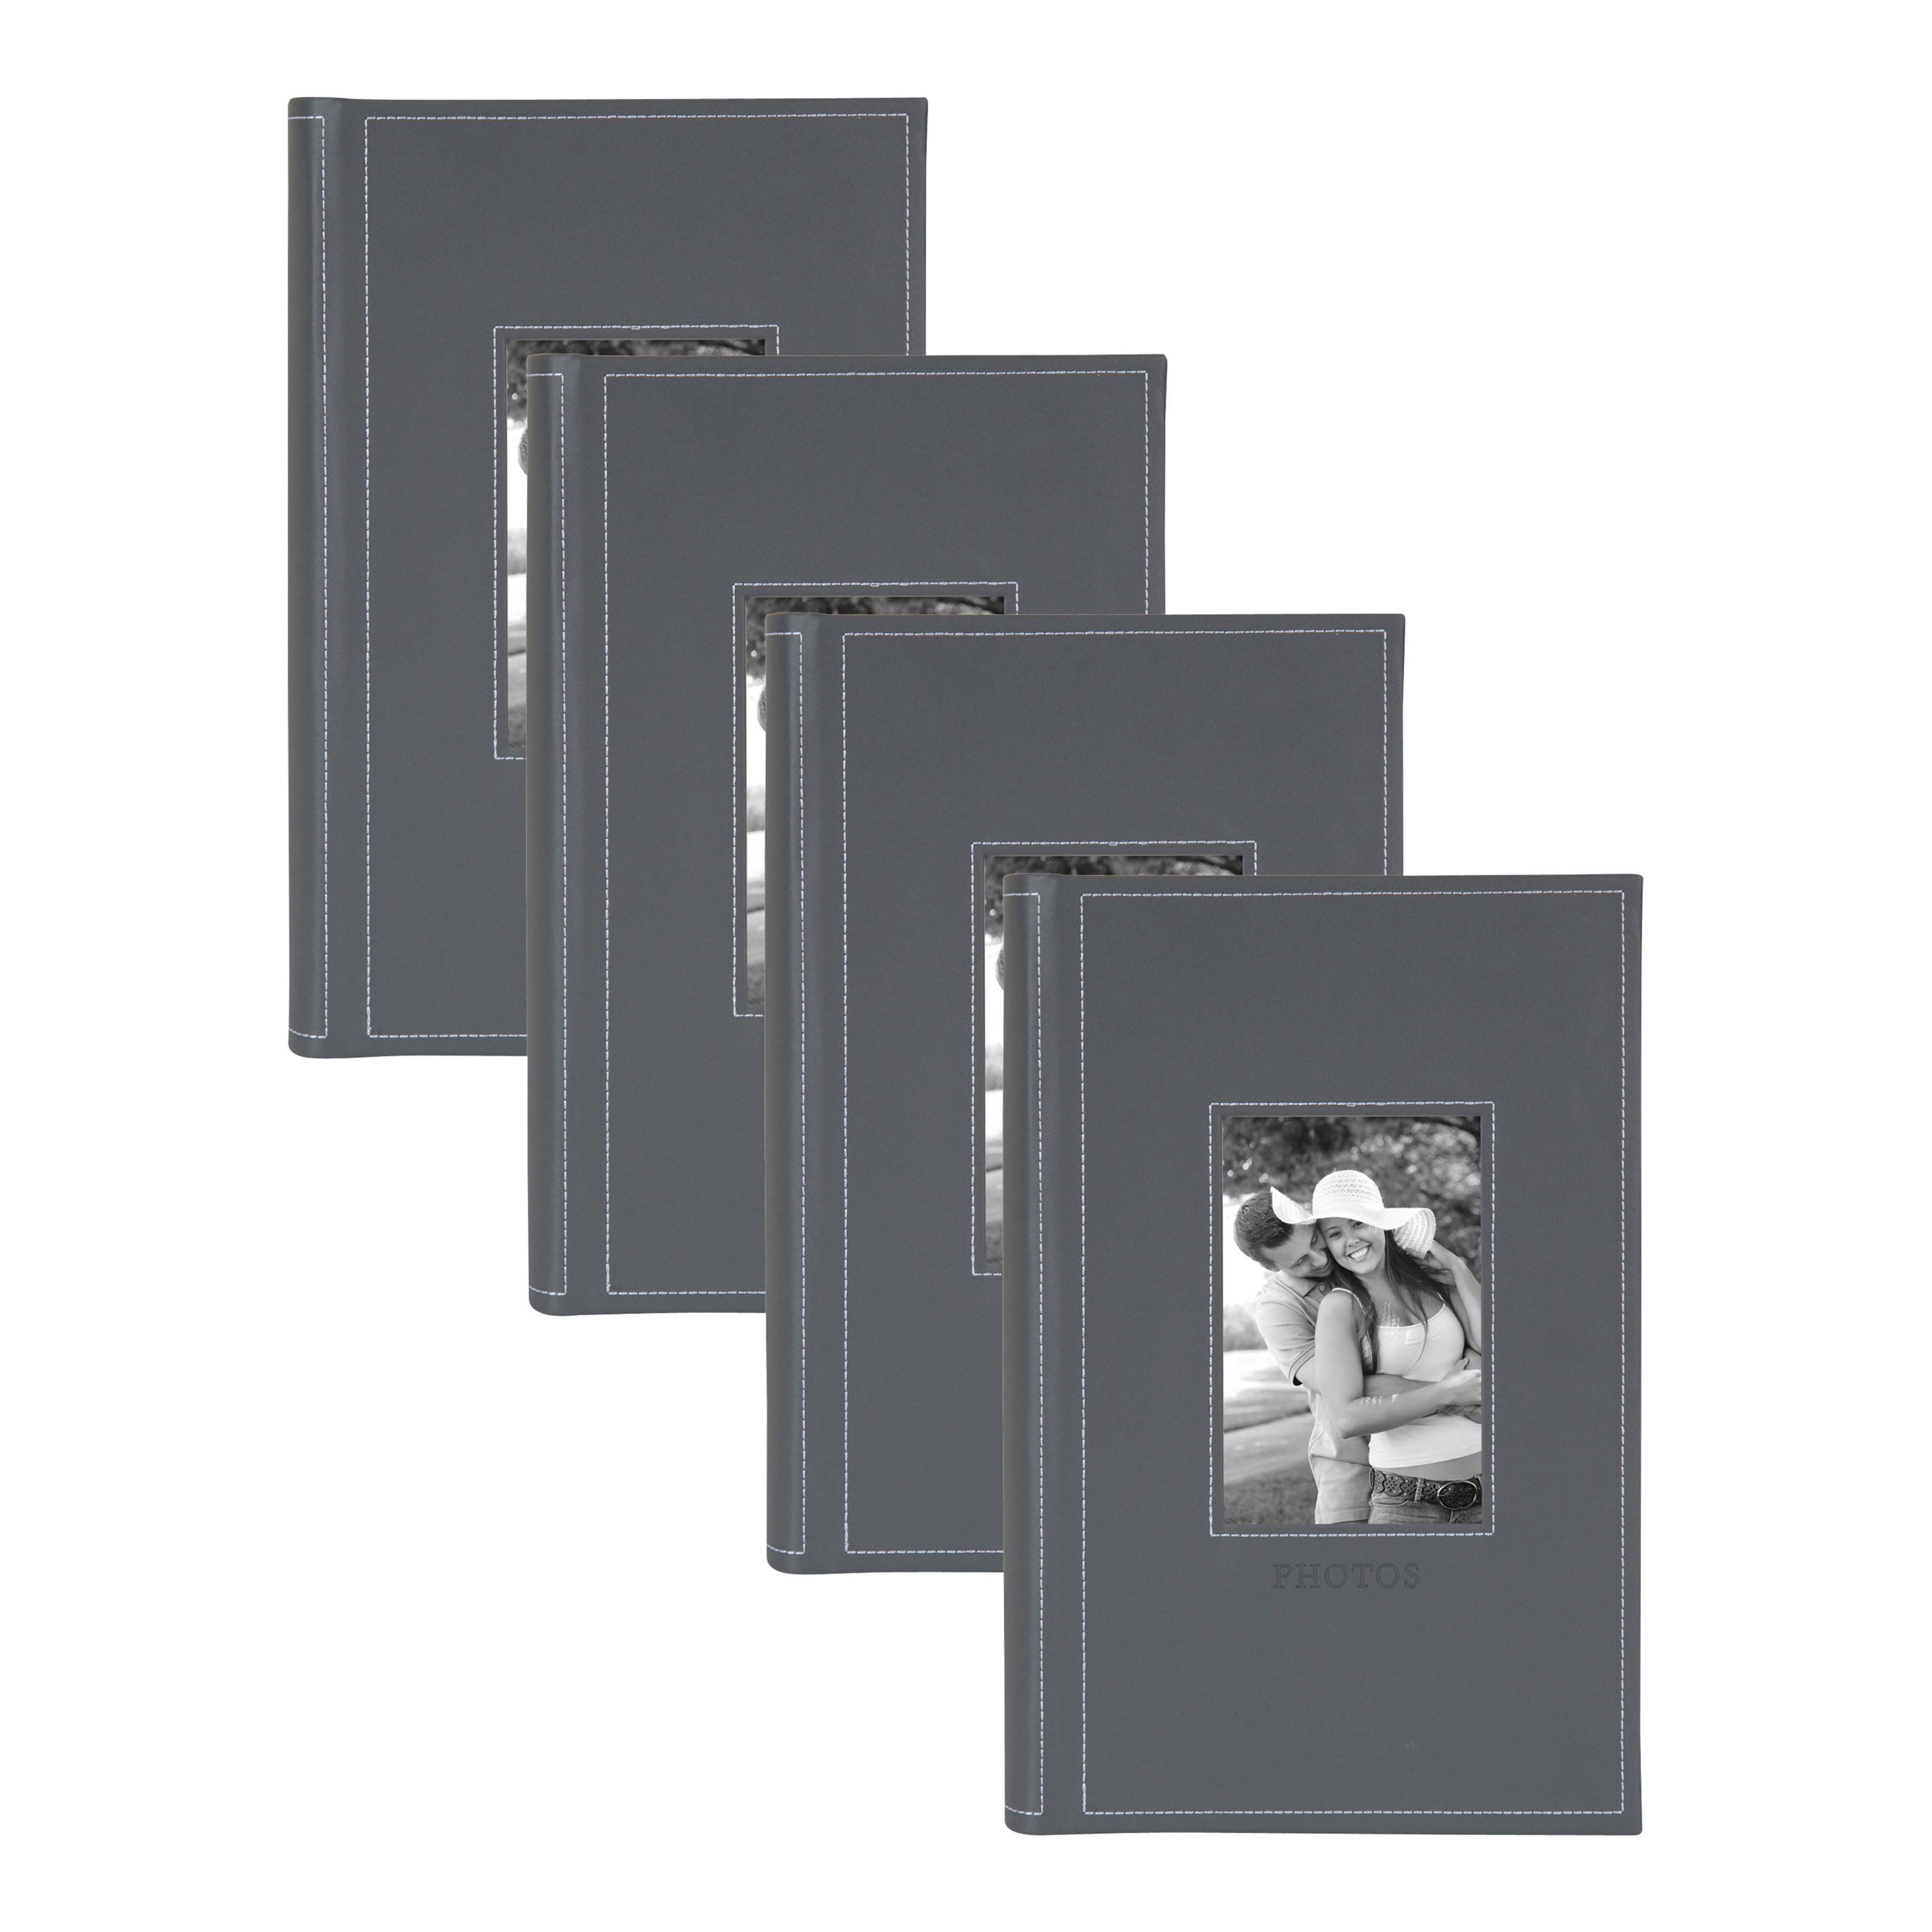 Photo Album 4x6 Photos Hold 700 Pockets Extra Large Capacity Leather Cover Black Pages with Index Tabs Wedding Picture Albums 700 Slip-in Pockets Photos Book for Anniversary Family Baby Vacation